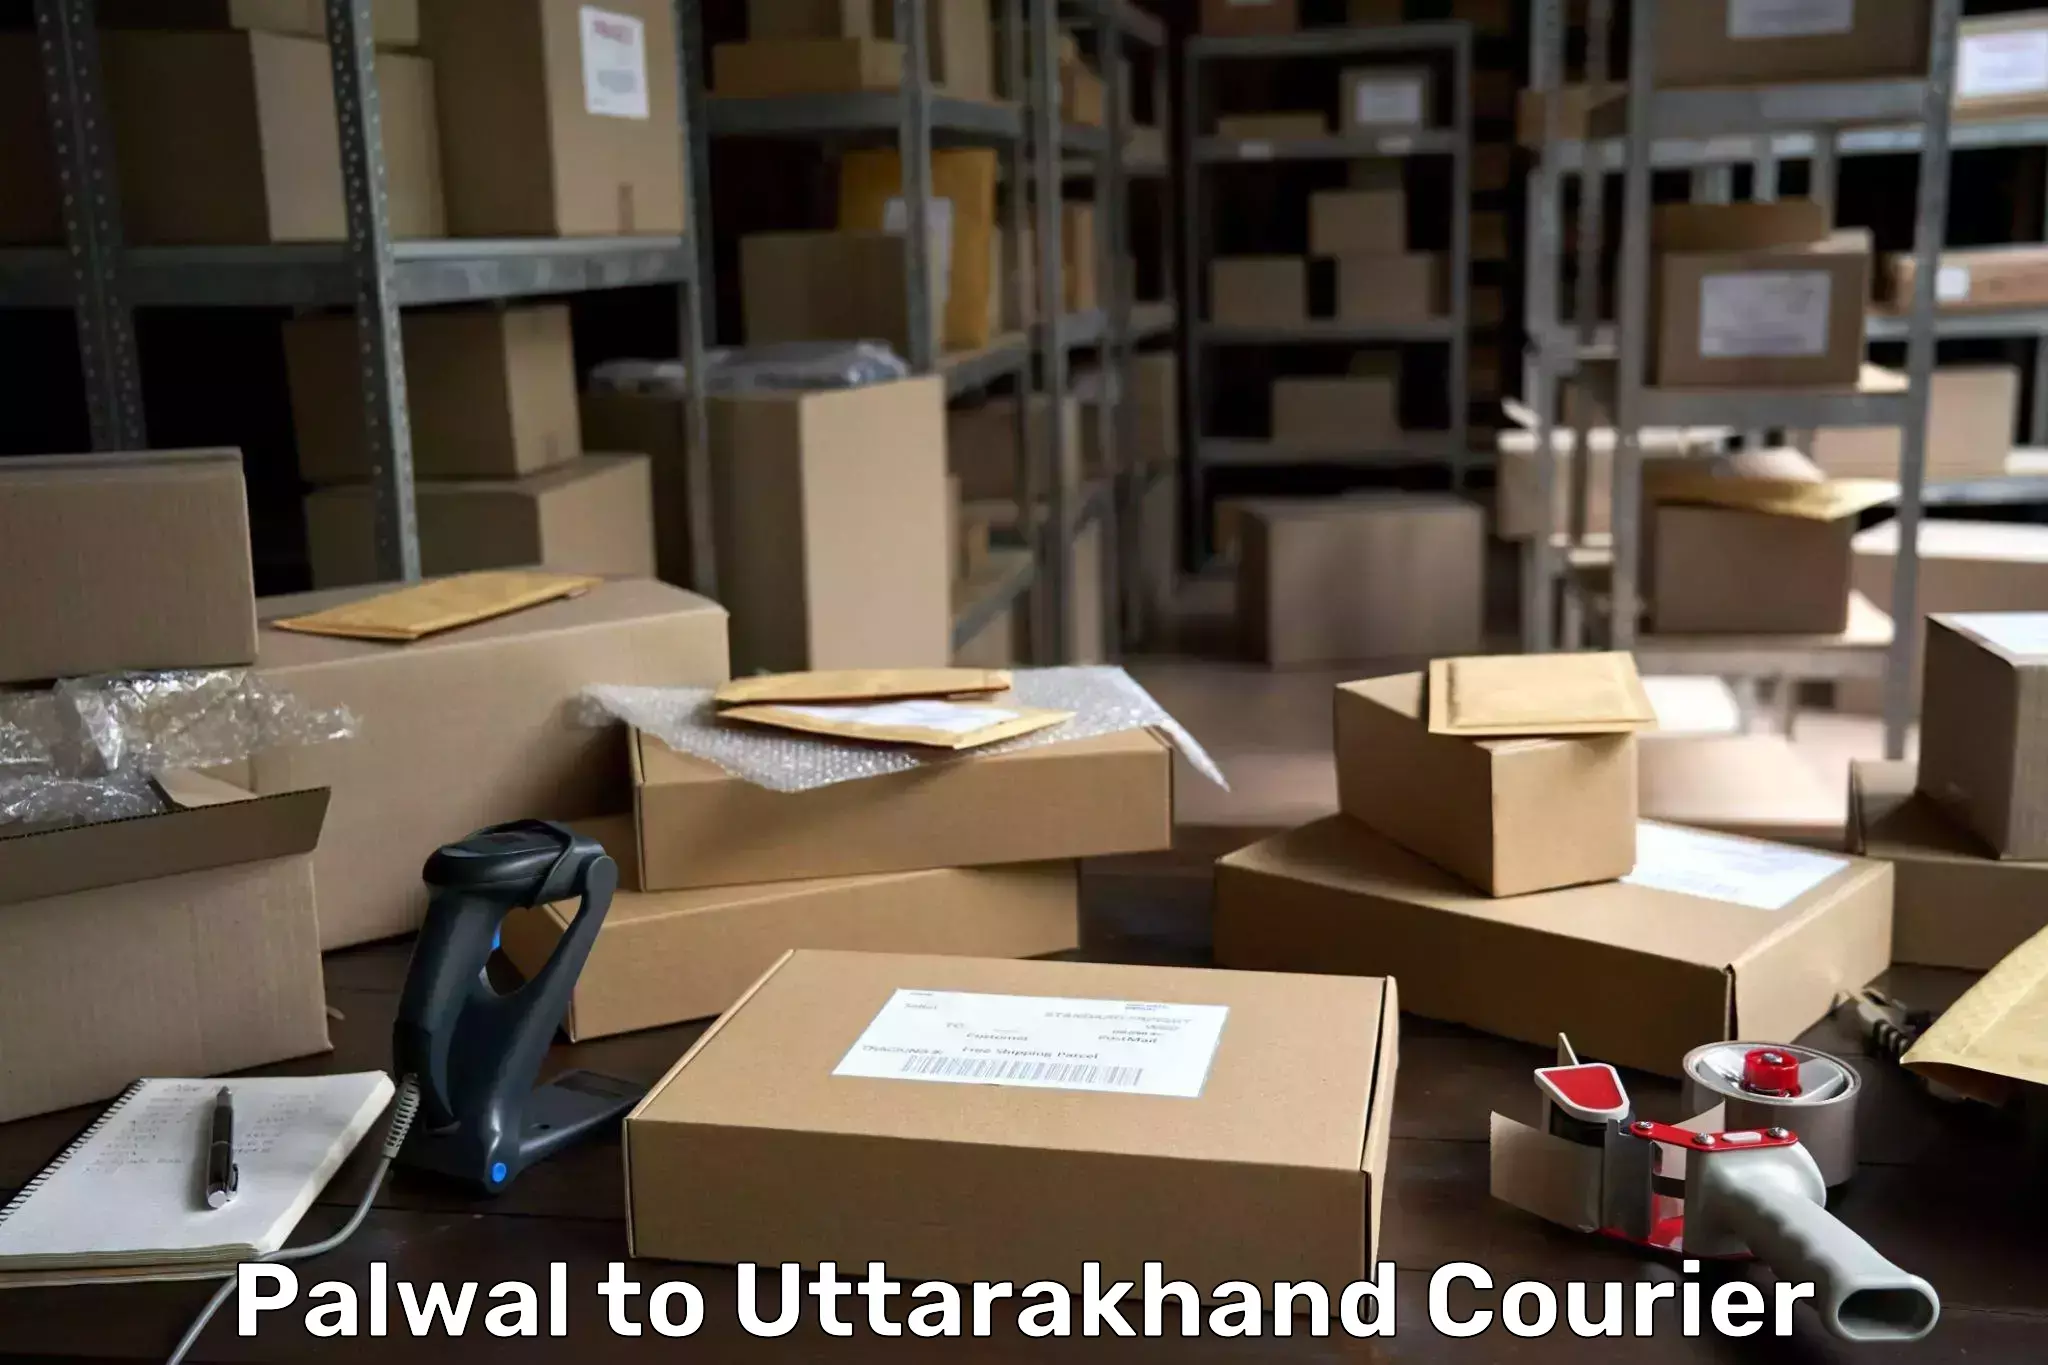 State-of-the-art courier technology Palwal to Rudrapur